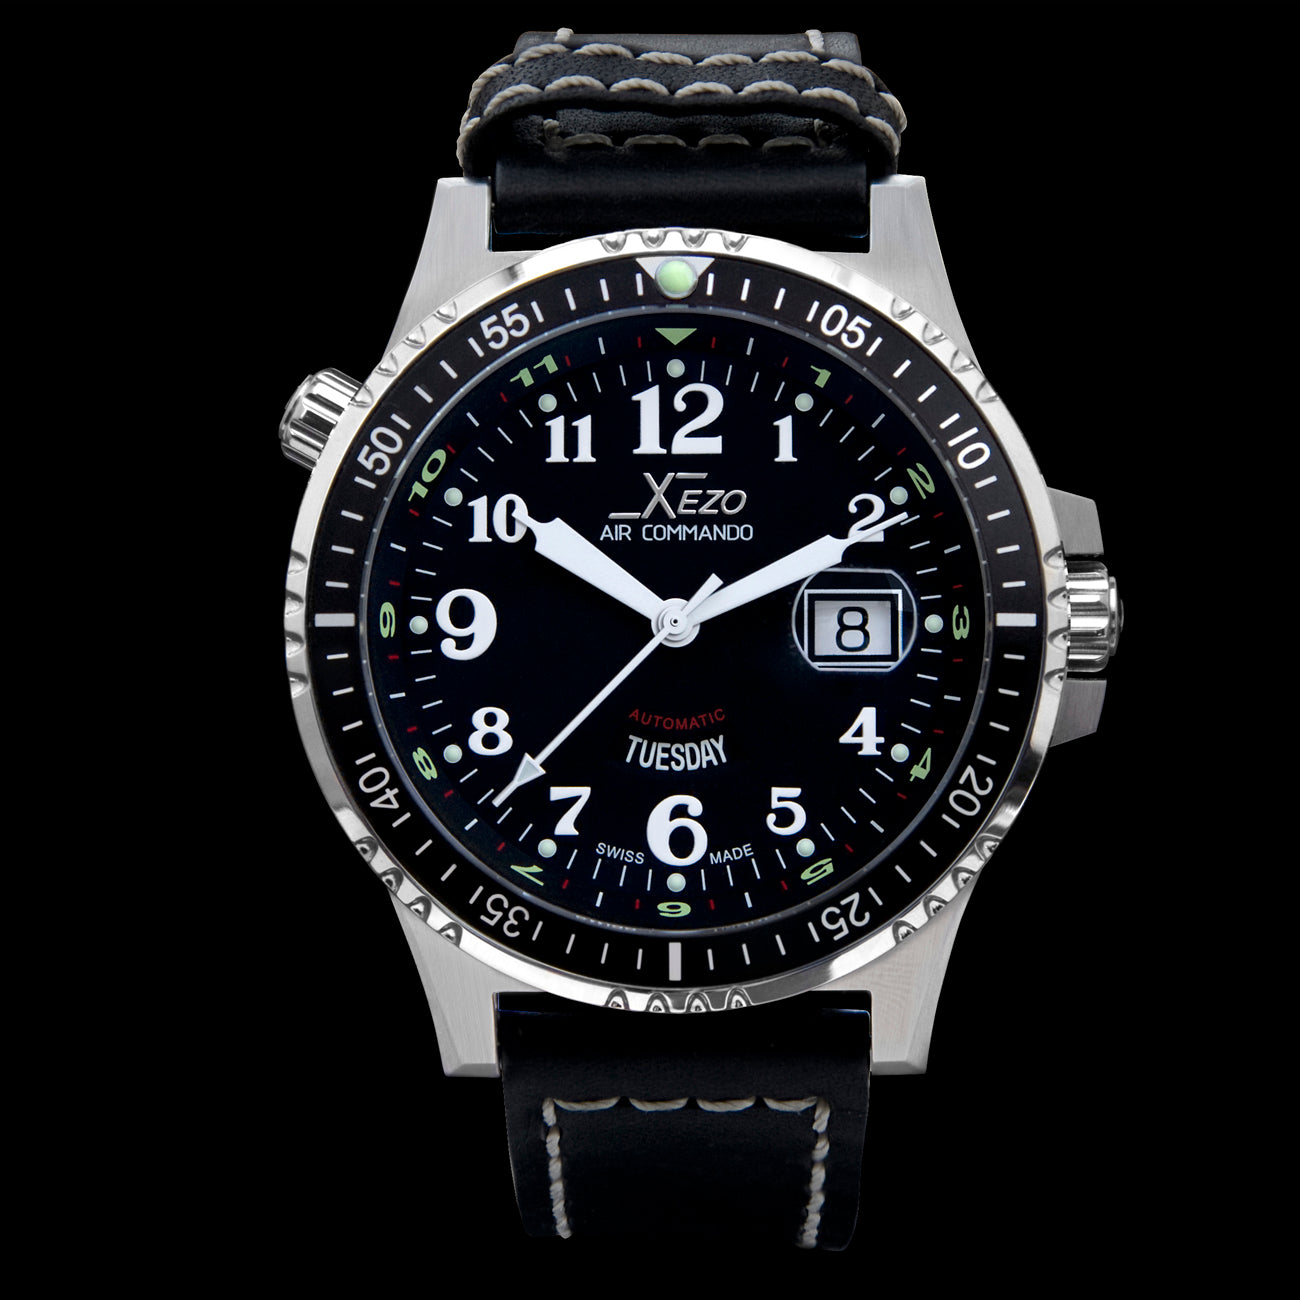 Xezo - Front view of the Air Commando D44-L watch with black leather strap